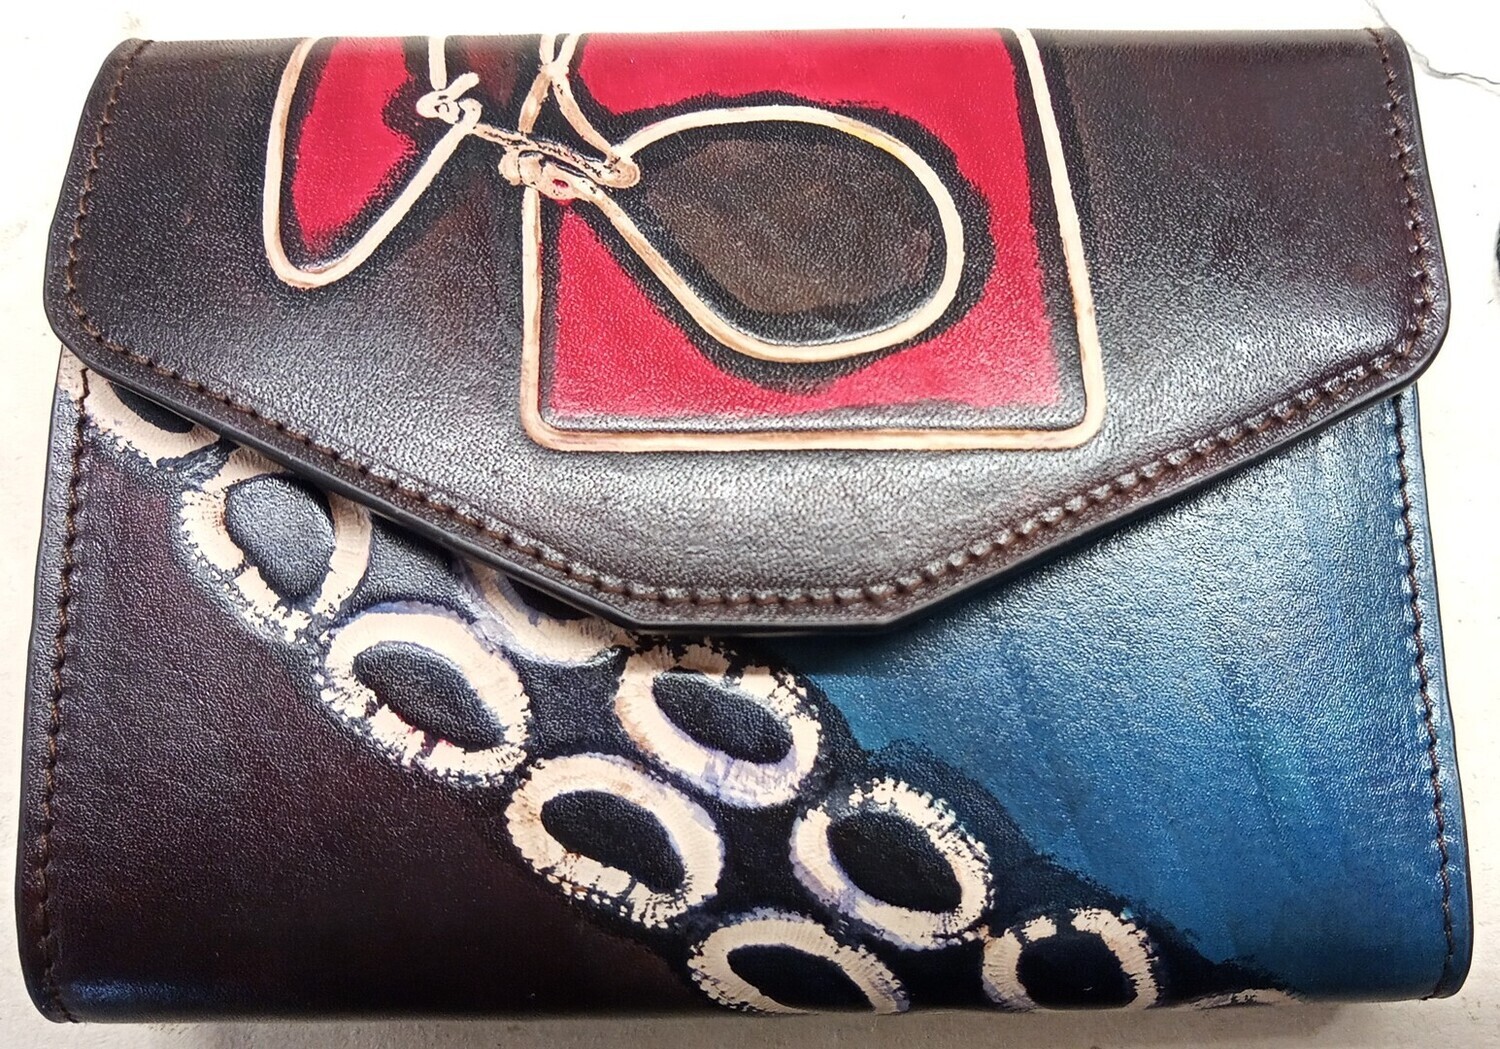 French purse ladies wallet handpainted leather